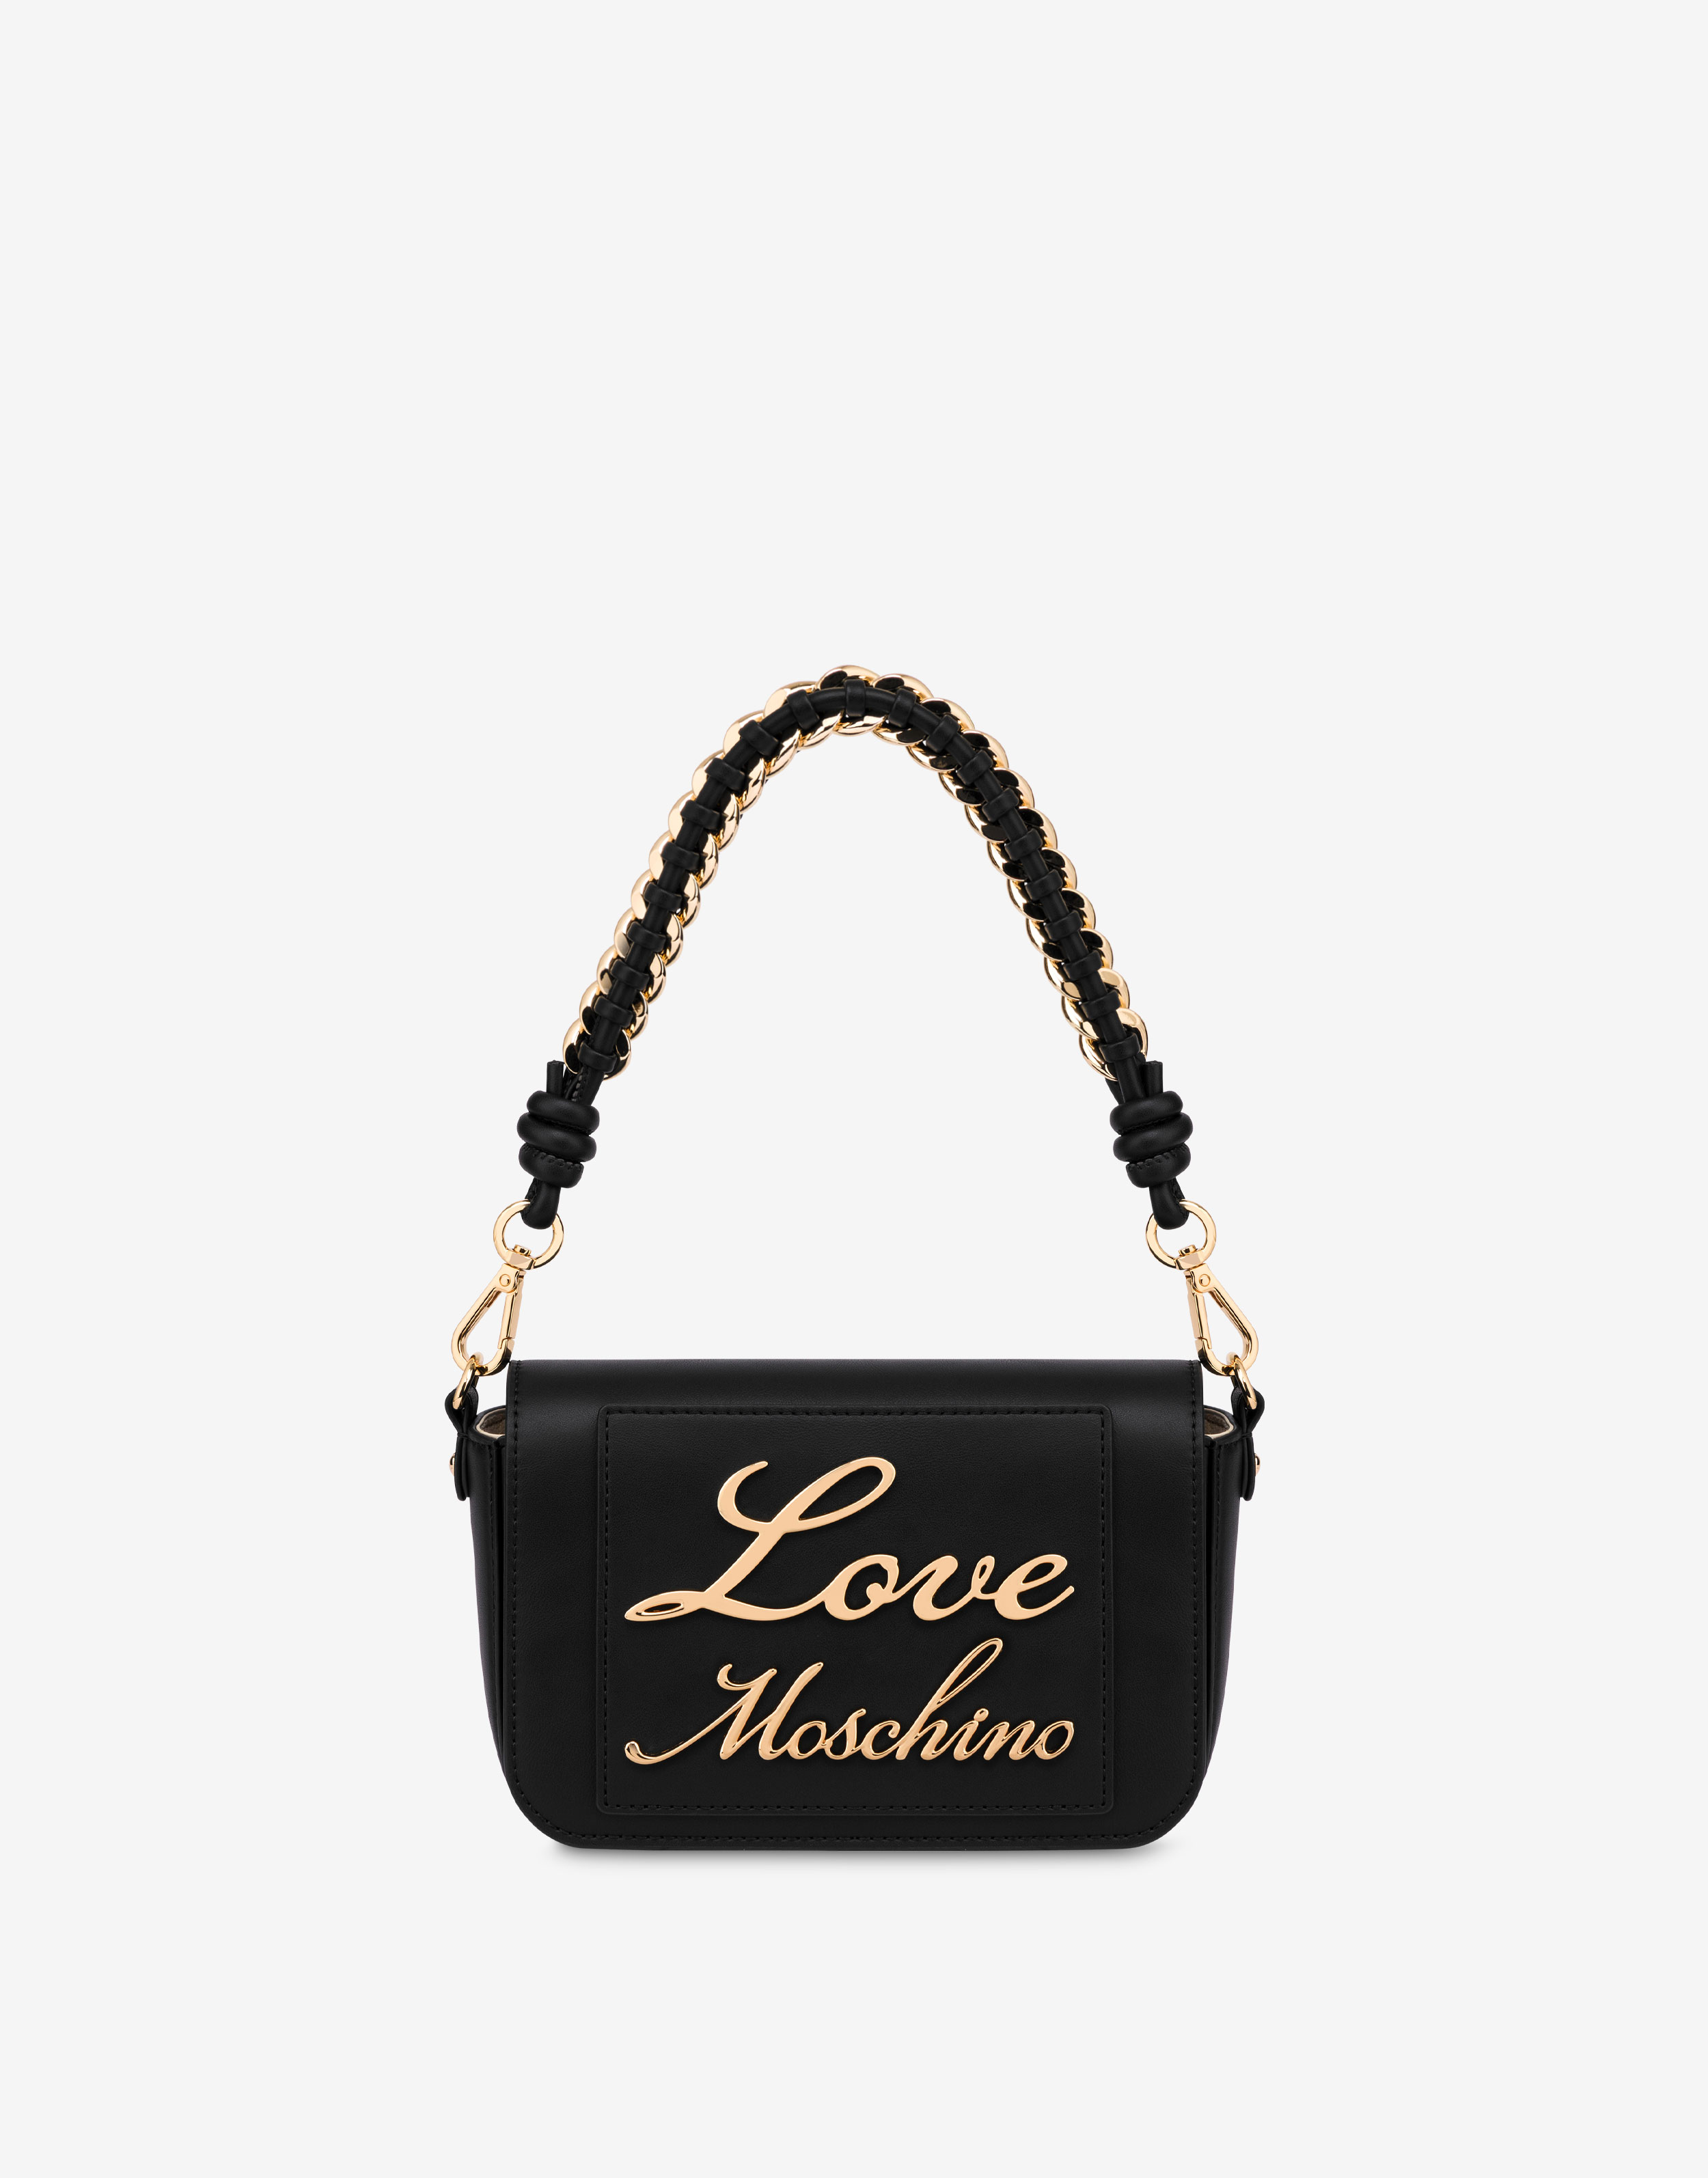 Love Moschino Women's Logo Shoulder Bag with Chain Strap